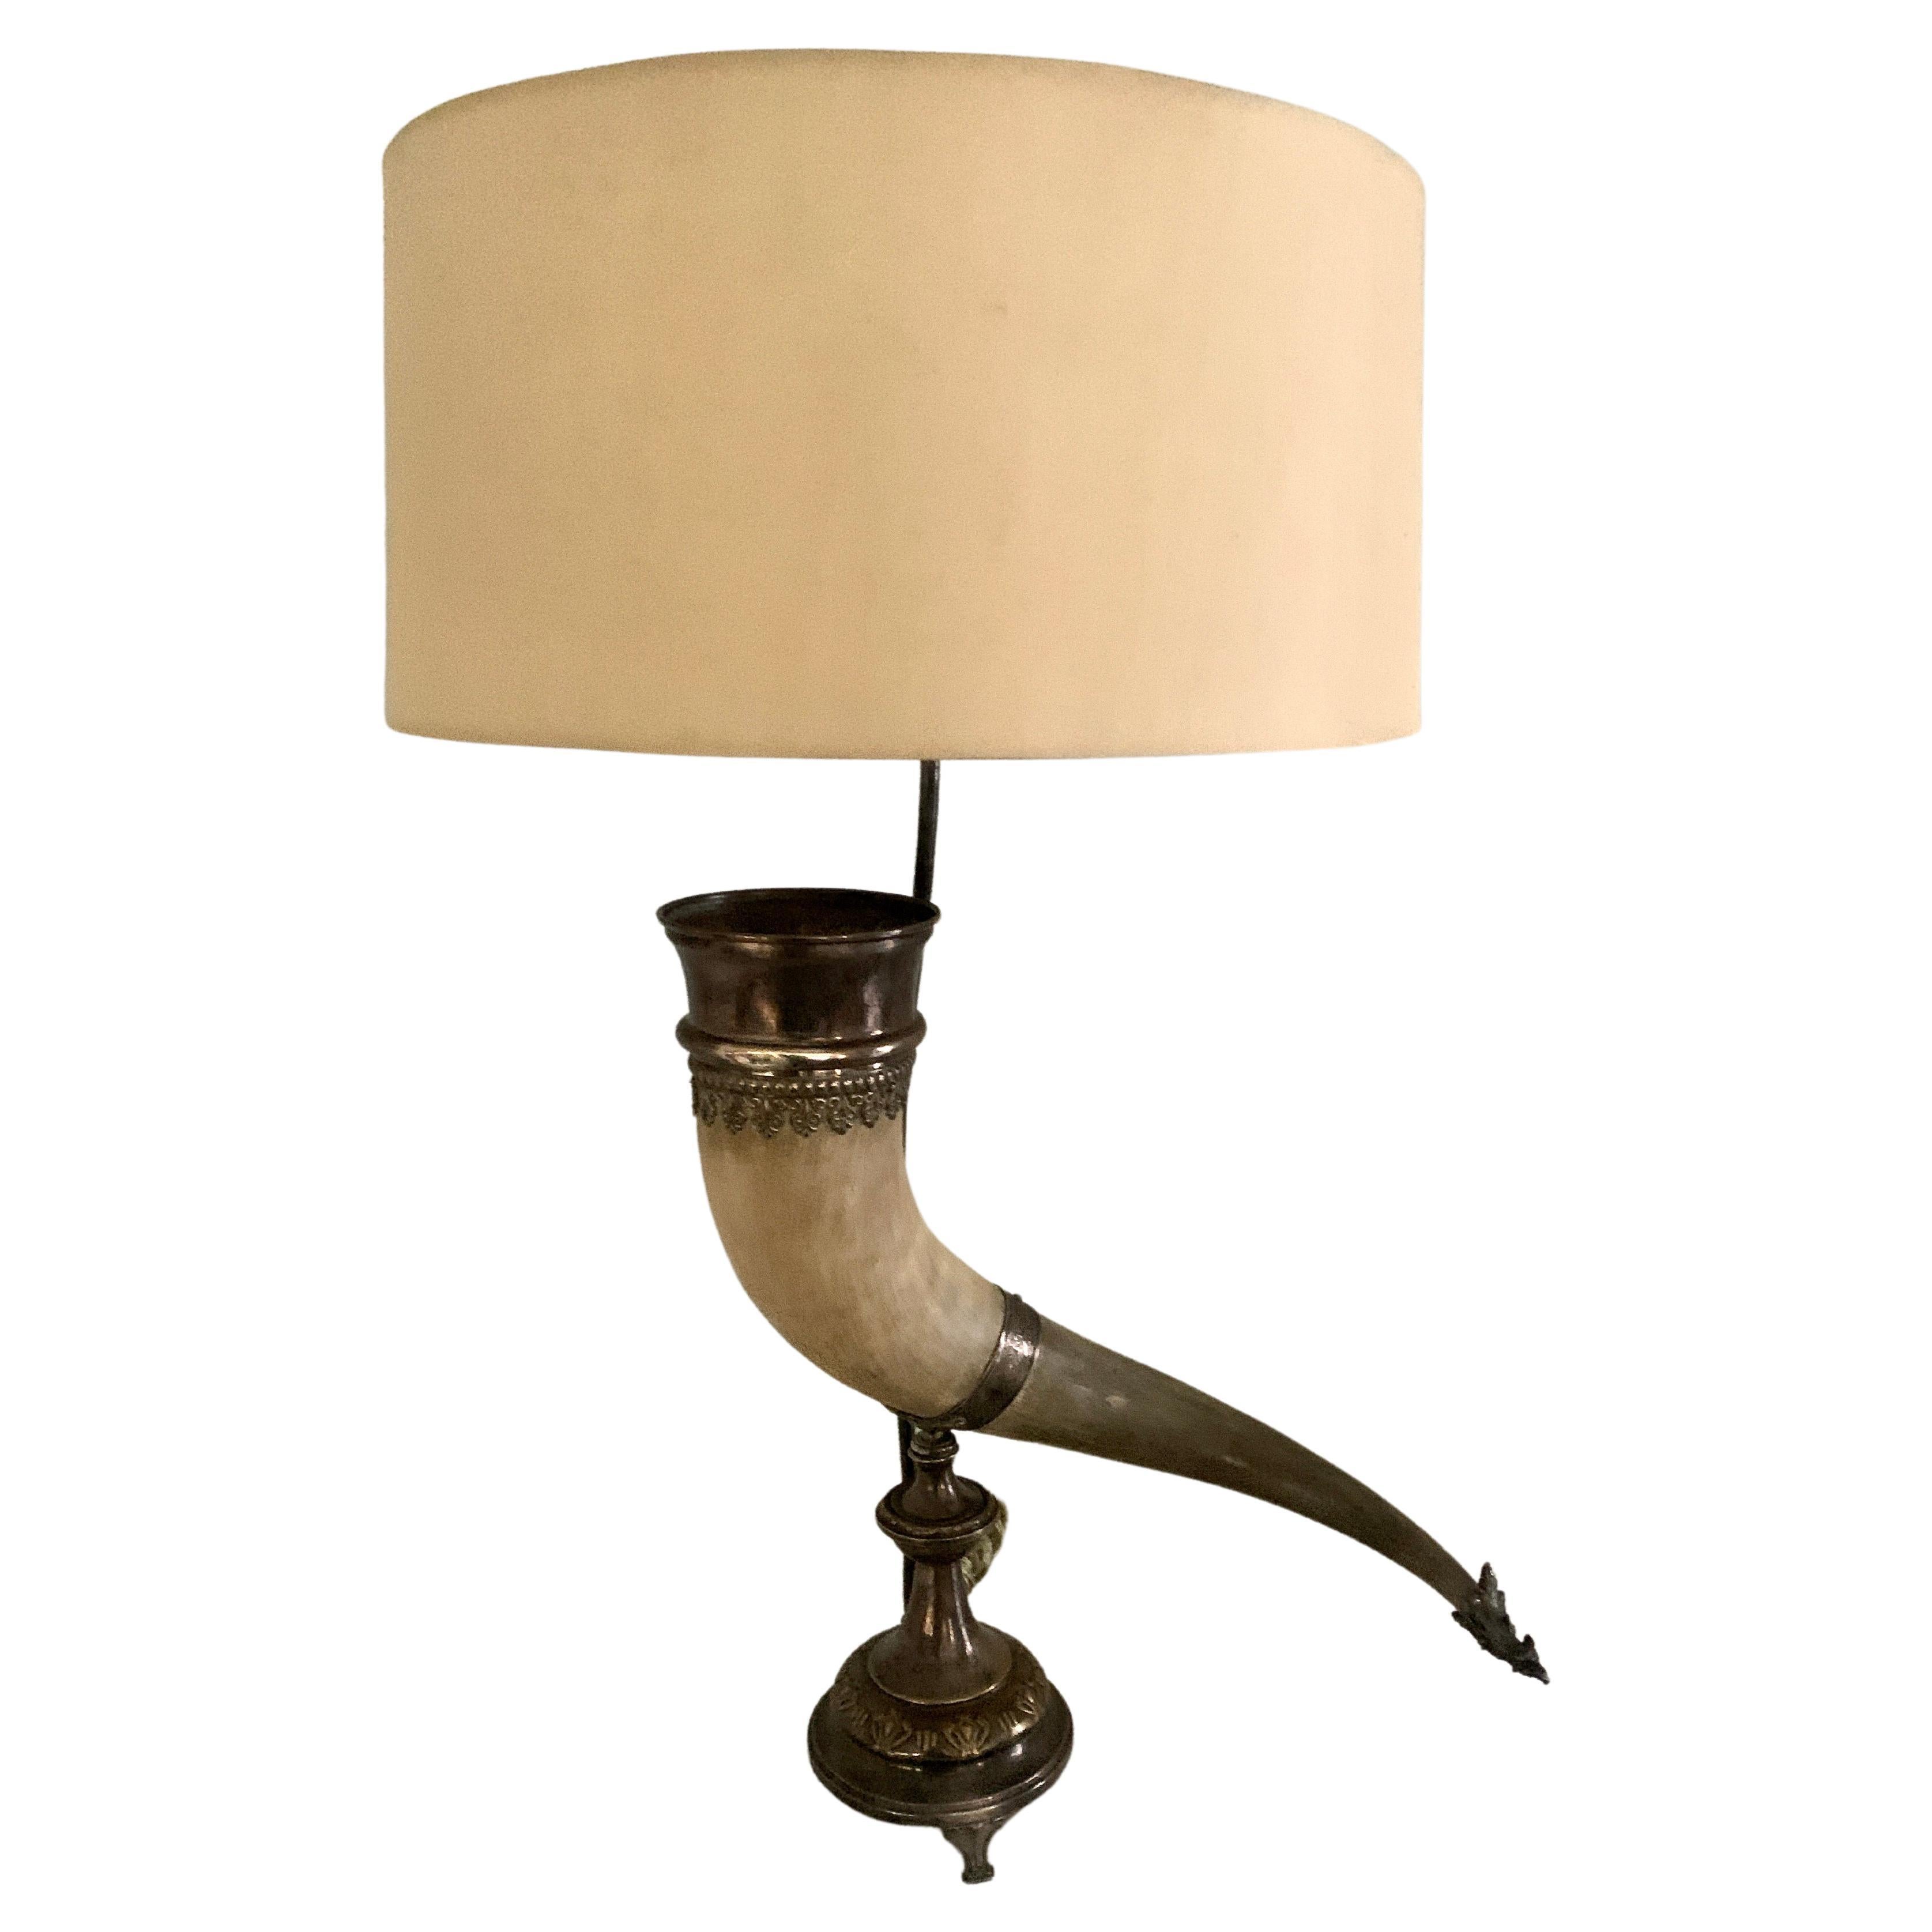 English Horn Table Lamp with Silver Plate Base and Fixture